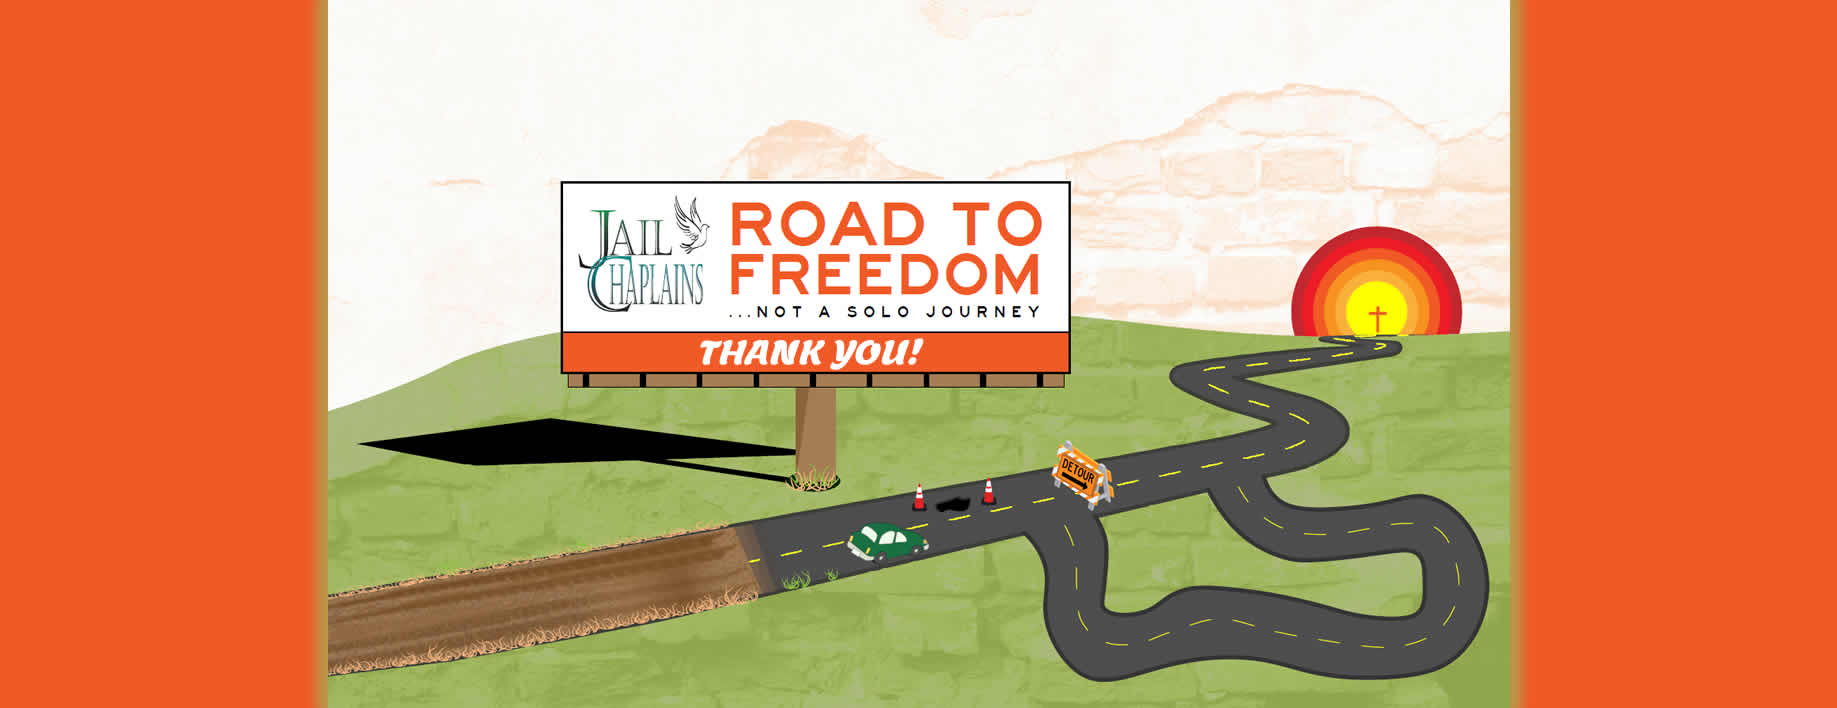 Thank you for your support of the Road to Freedom event.